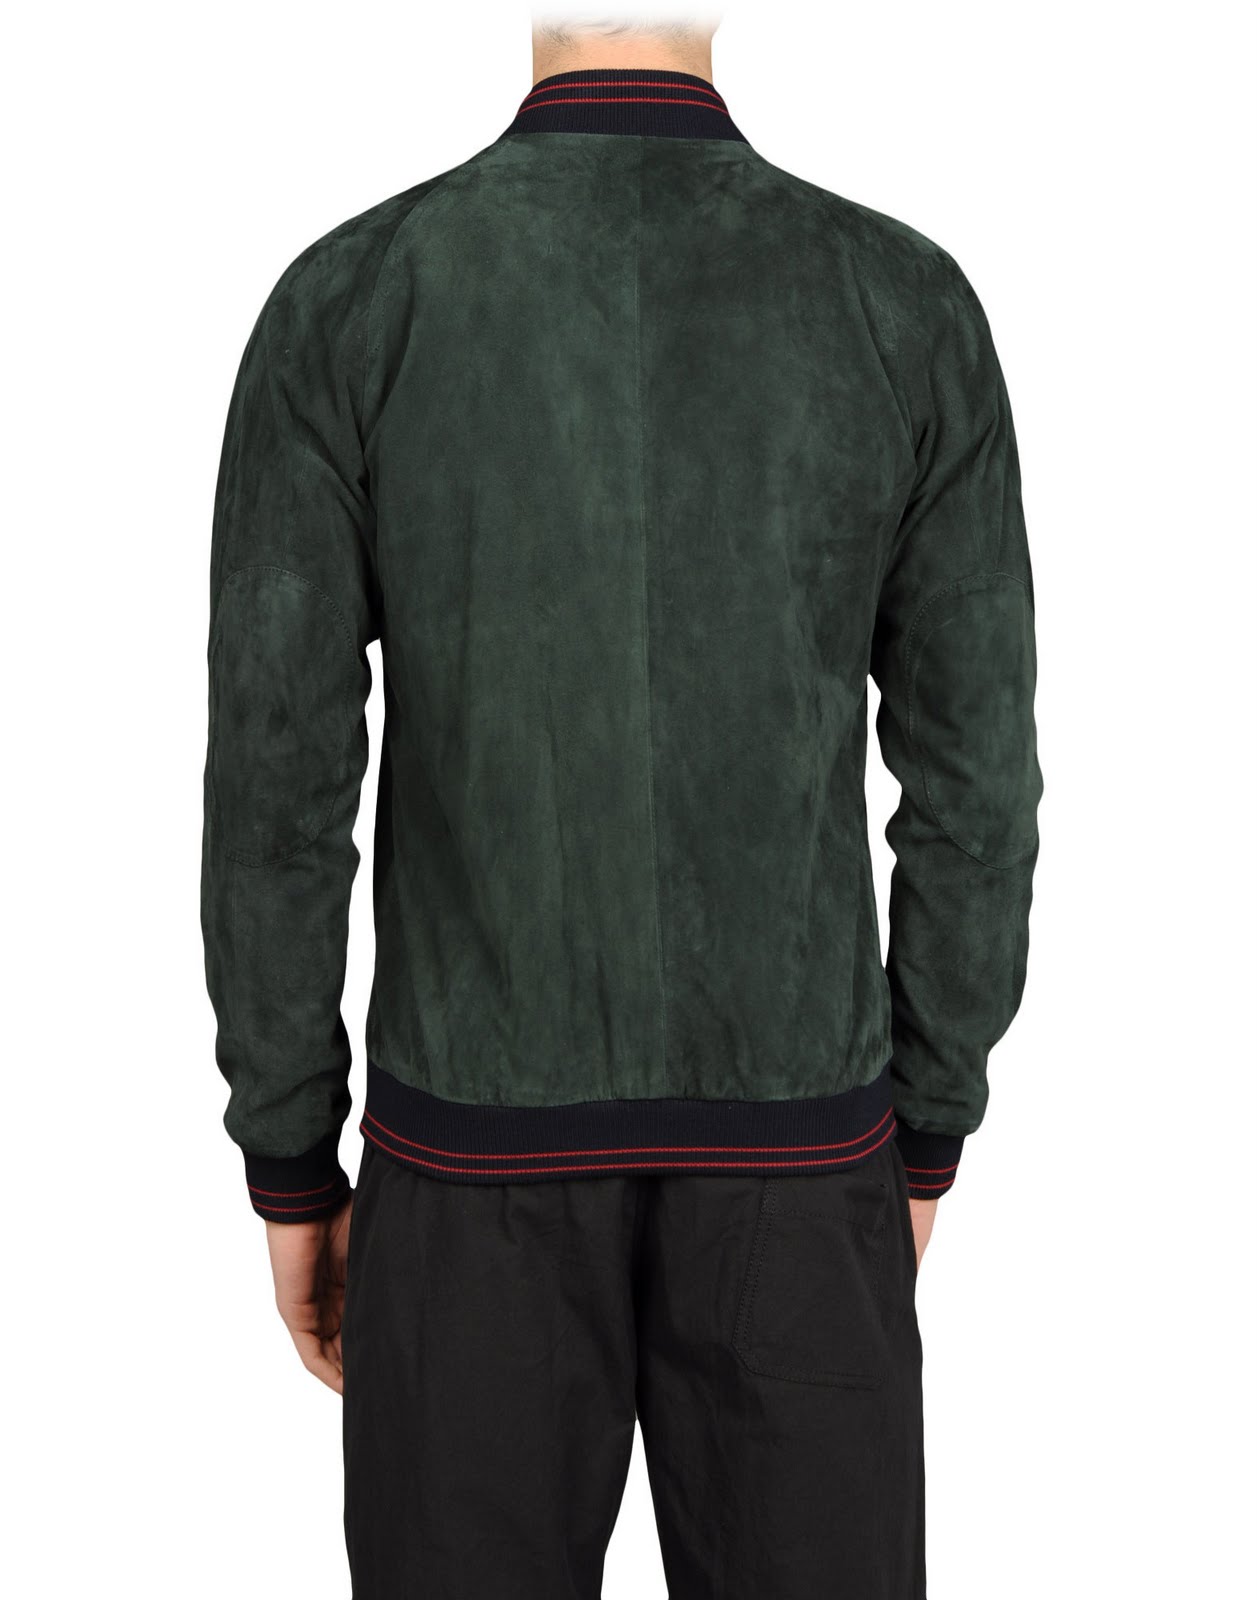 EMM (pronounced EdoubleM): BAND OF OUTSIDERS Suede Baseball Jacket in Green